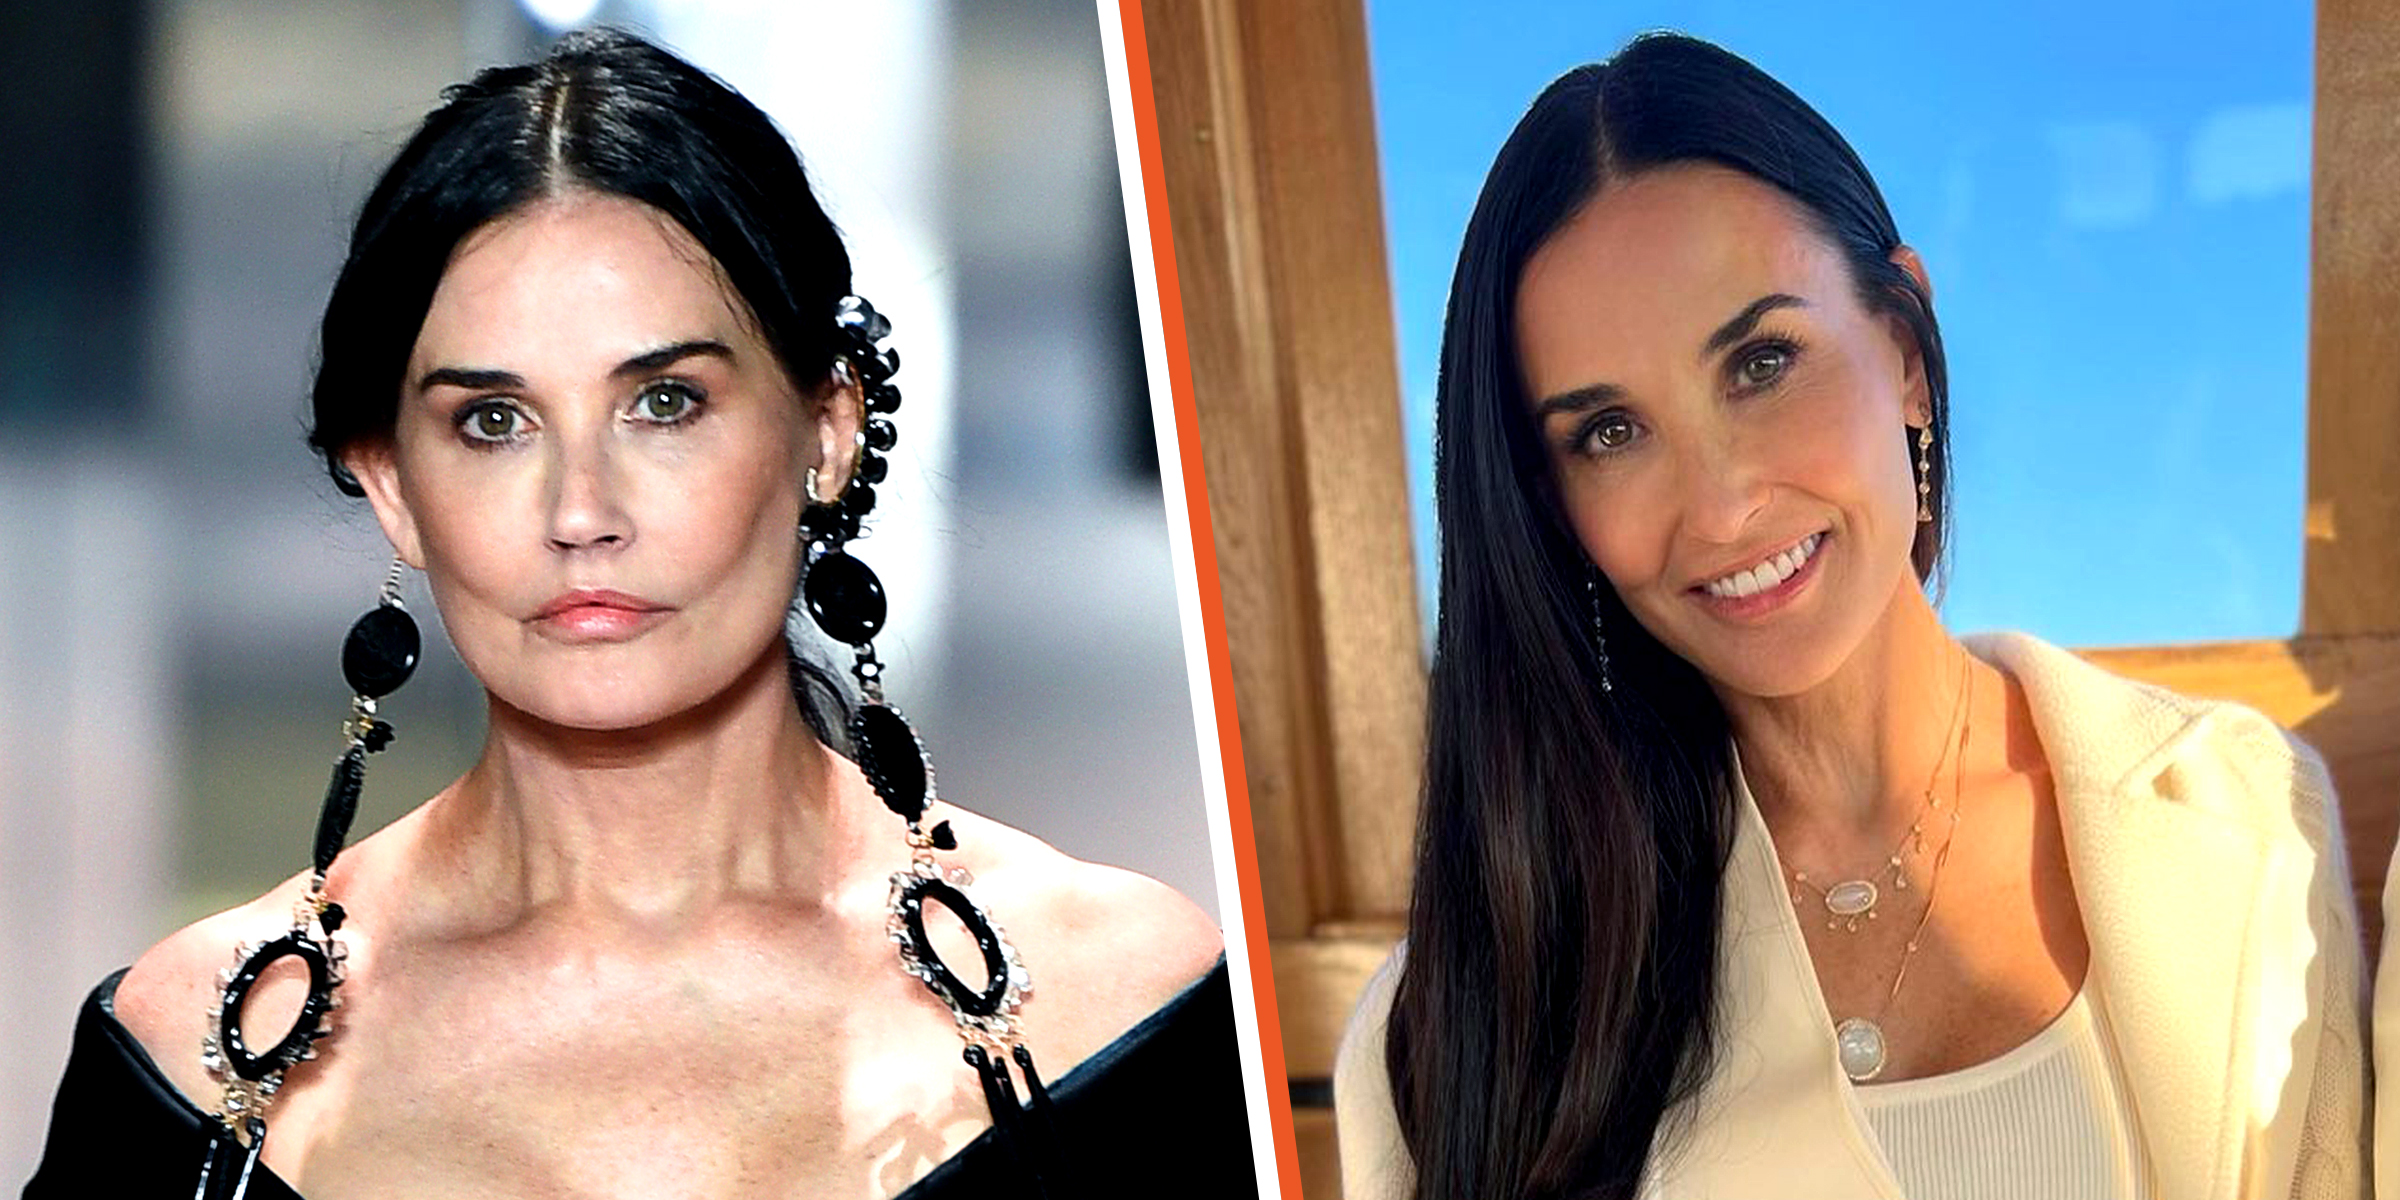 Demi Moore | Source: Getty Images | Instagram.com/@demimoore